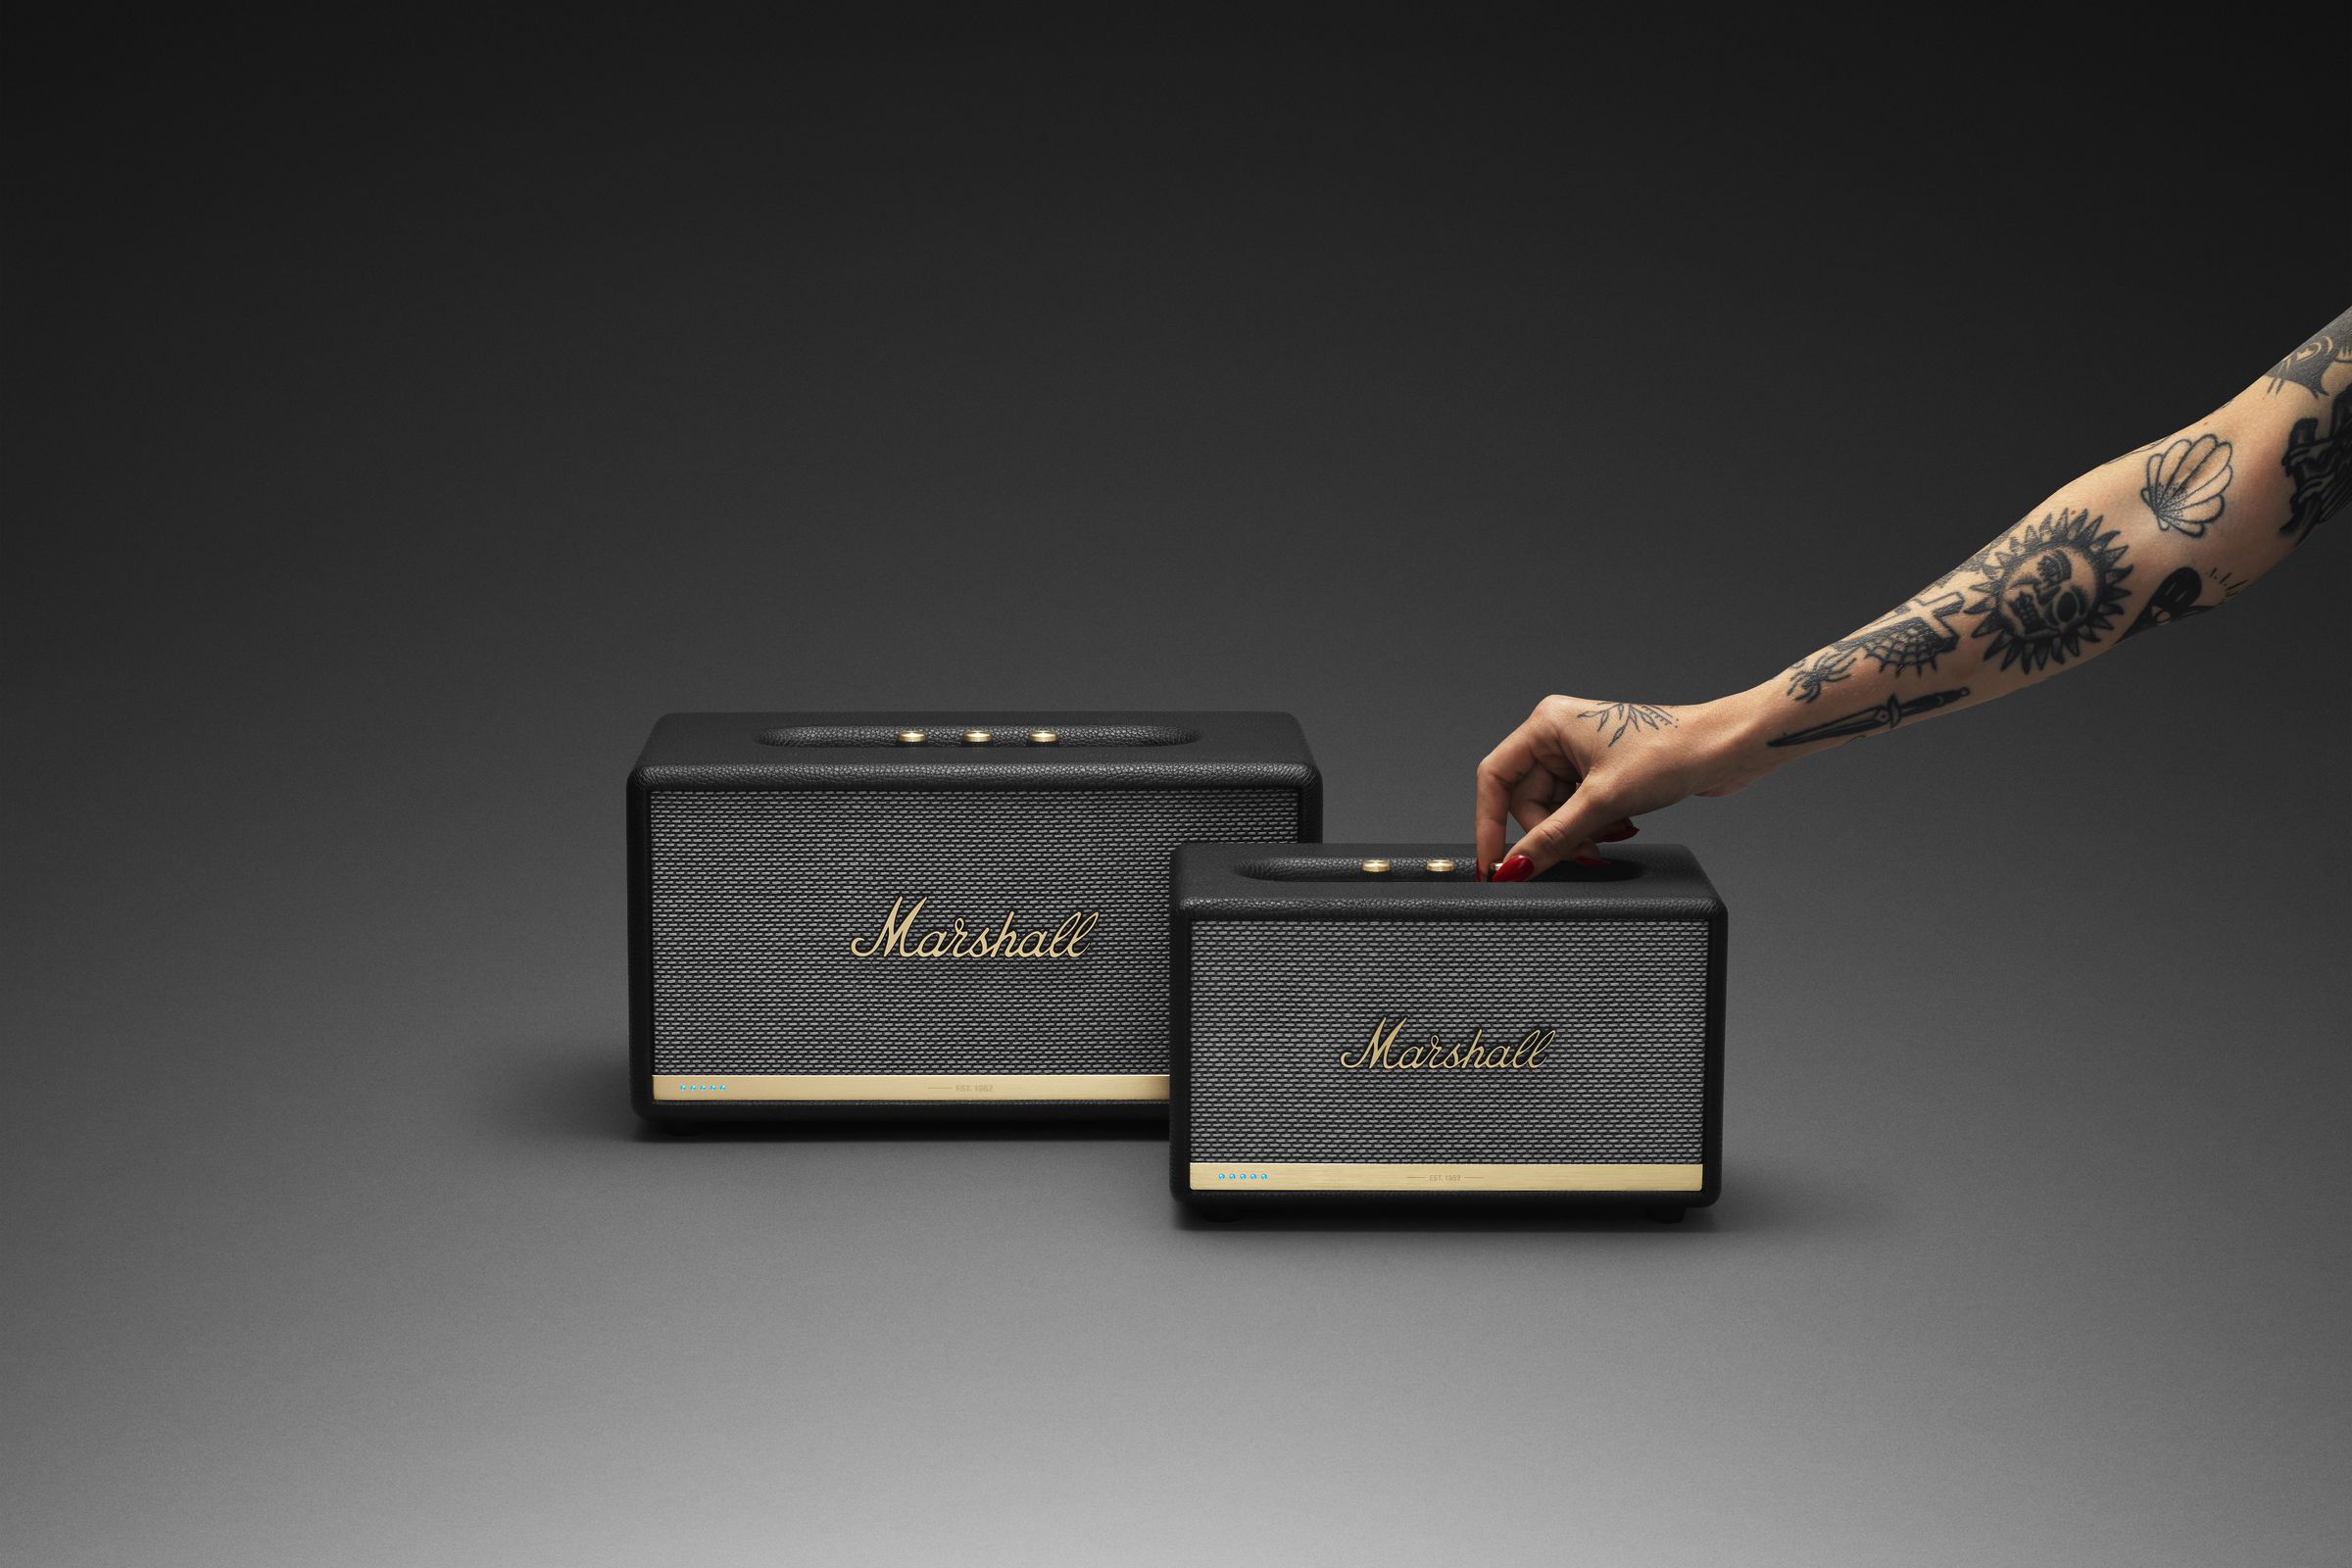 Marshall Headphone’s new Stanmore II Voice (left) and Acton II Voice (right) speakers.